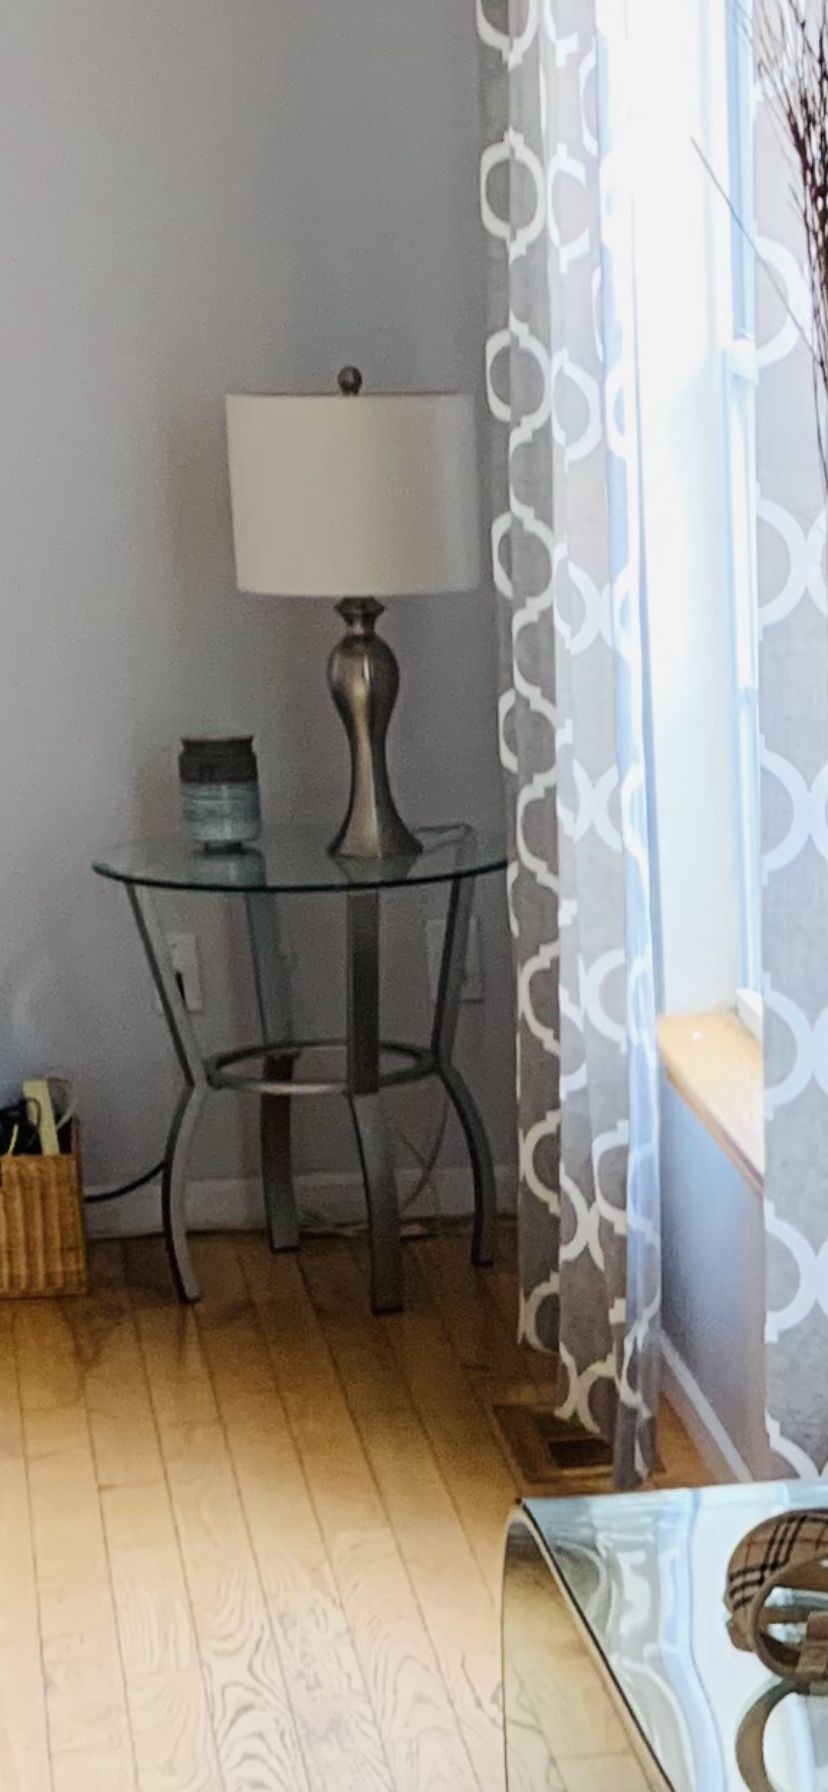 End table, Glass Top And Gray Metal Legs. Very Chic!